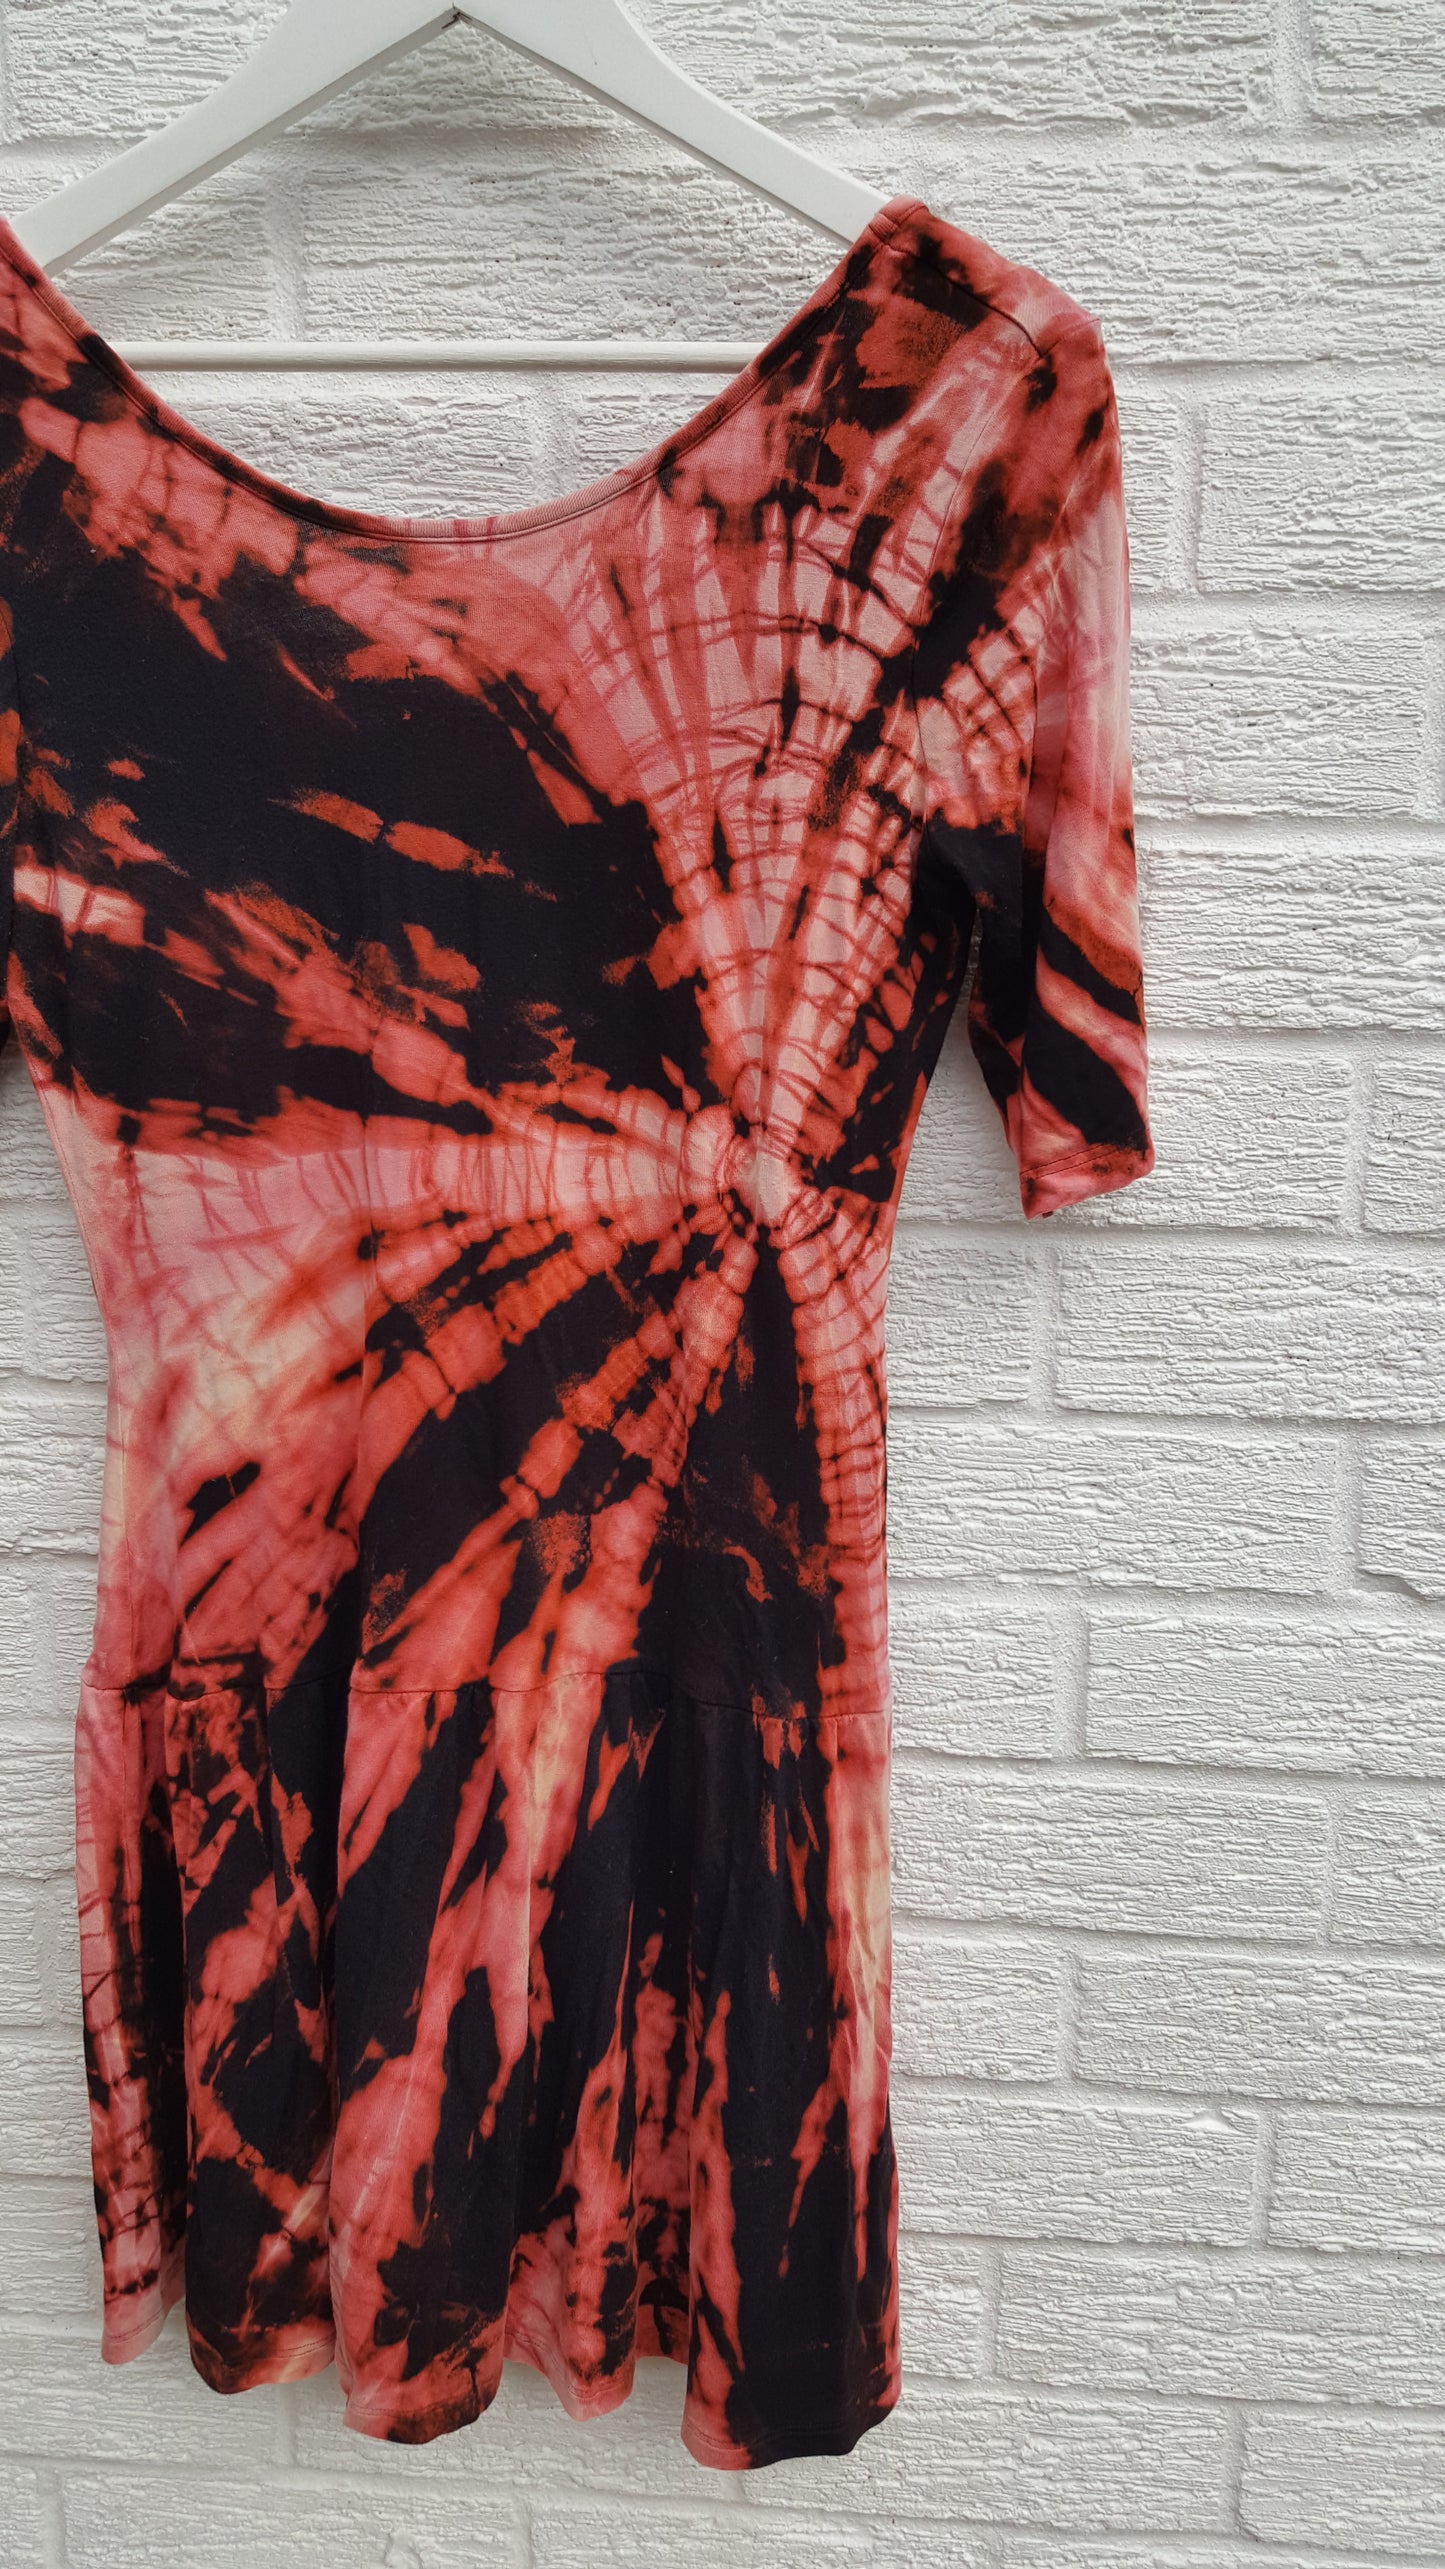 Bleached Shibori style tie dye dress in black & peach shades, jersey fabric mini dress with short sleeves and low back, to fit UK Size 10 or US size 6.  This beautiful one of a kind dress was thrifted and upcycled in the UK, so it's not just one of a kind! It's also sustainable & friendly to the environment too! Hand dyed with love by AbiDashery. BE QUICK - THIS IS A ONE OFF UPCYCLE & THERE'S ONLY ONE AVAILABLE!